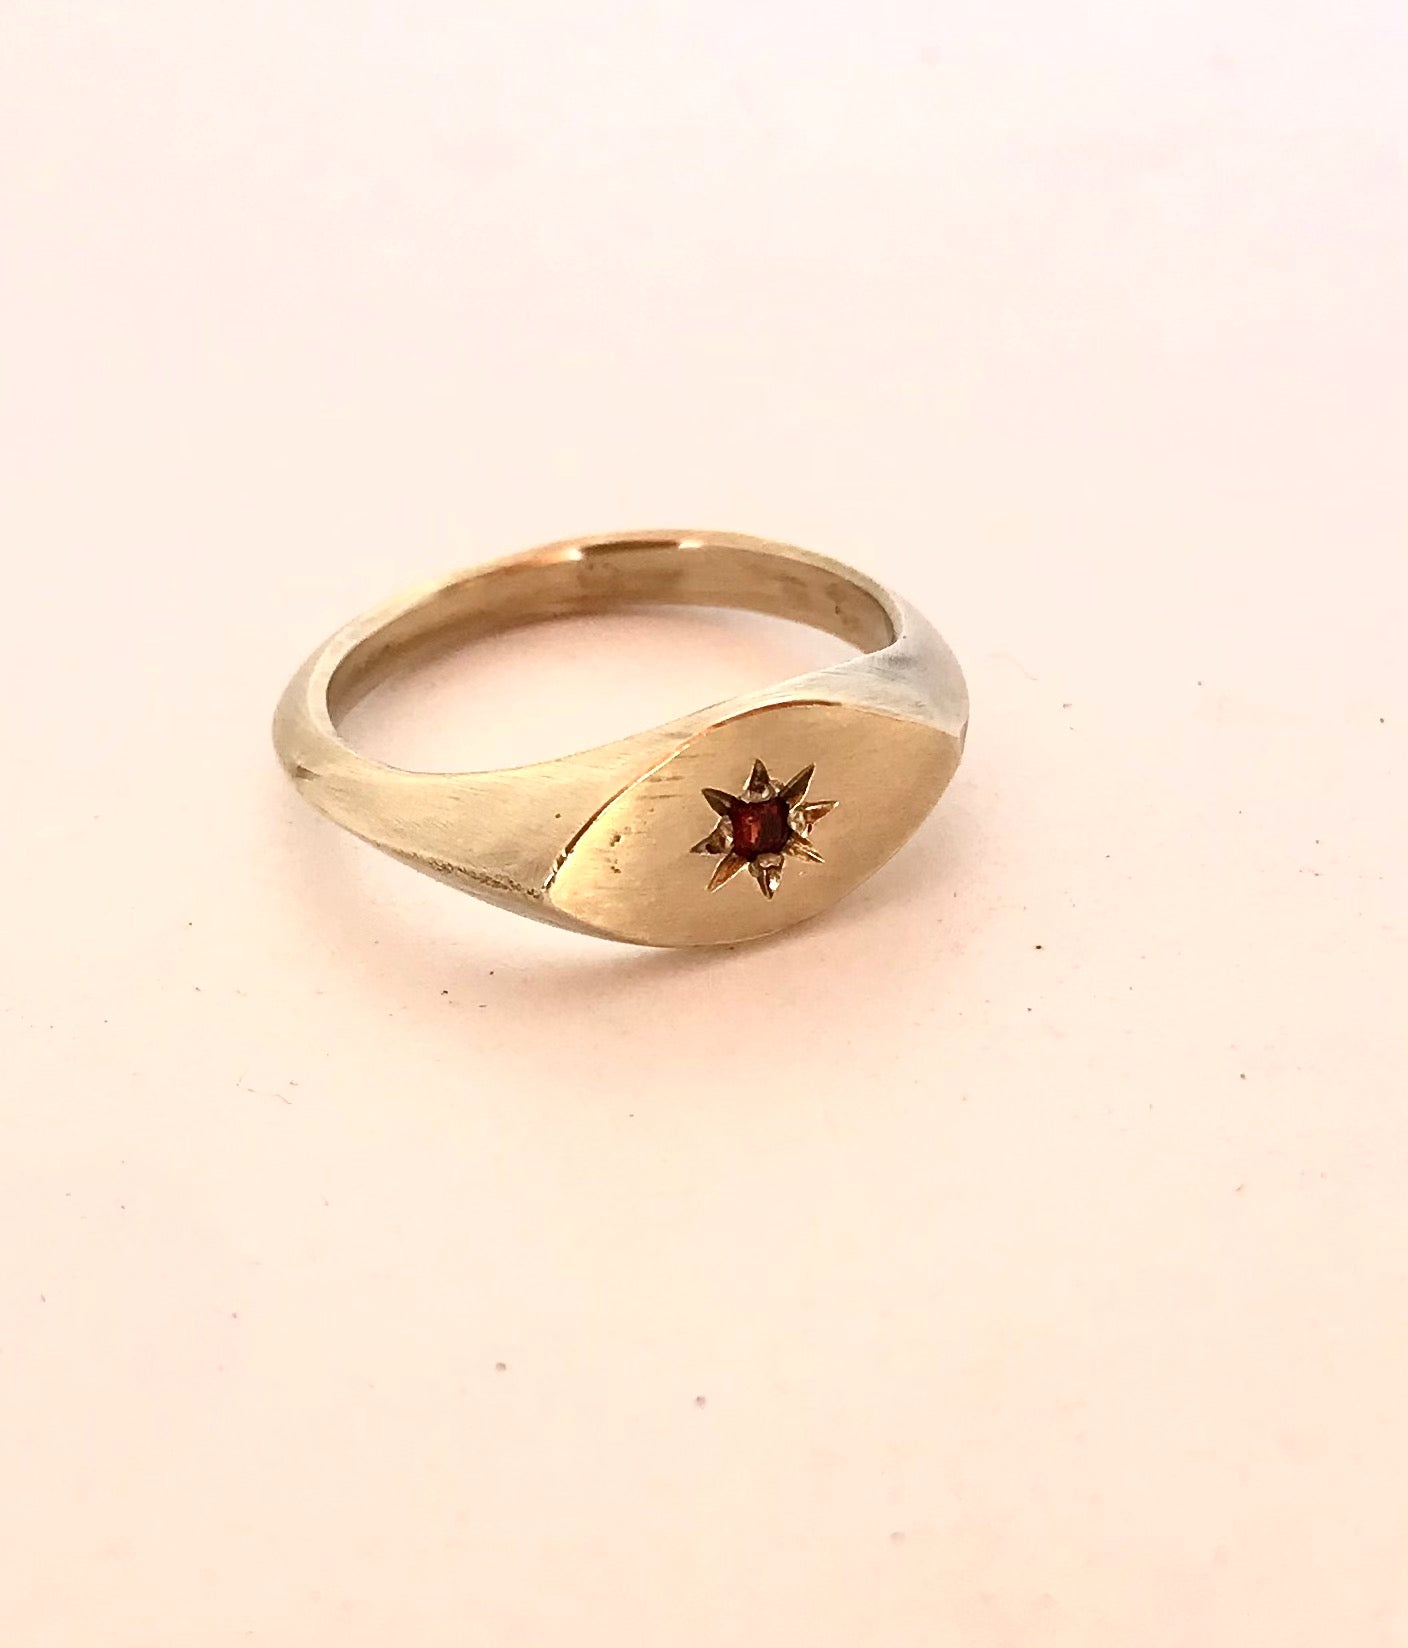 Close-up of the brass signet ring showcasing the star engraving and gemstone setting